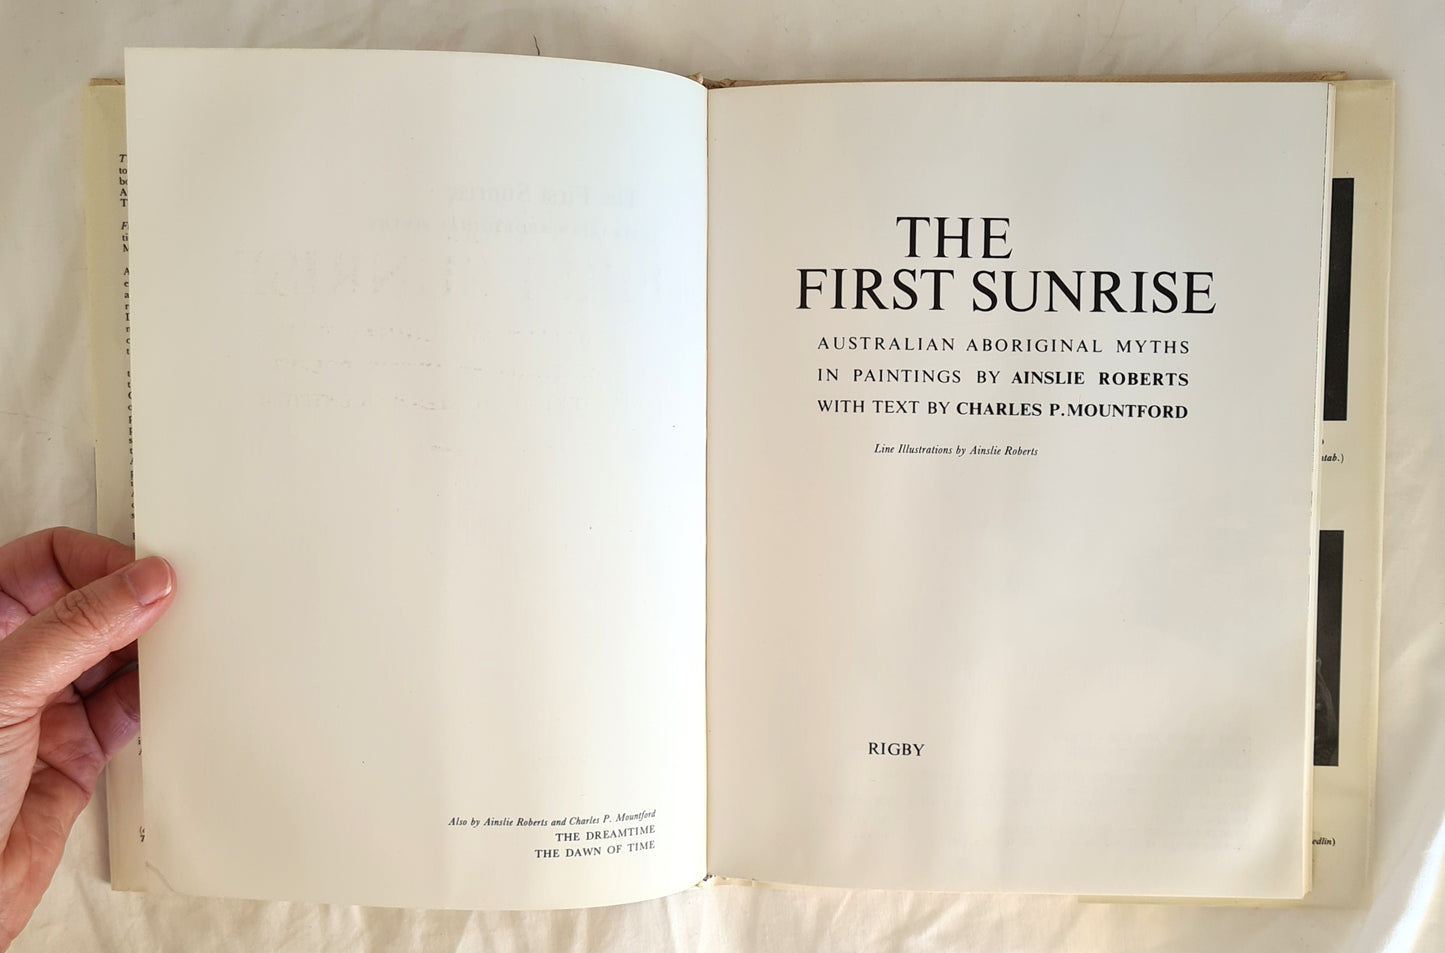 The First Sunrise by Ainslie Roberts and Charles P. Mountford